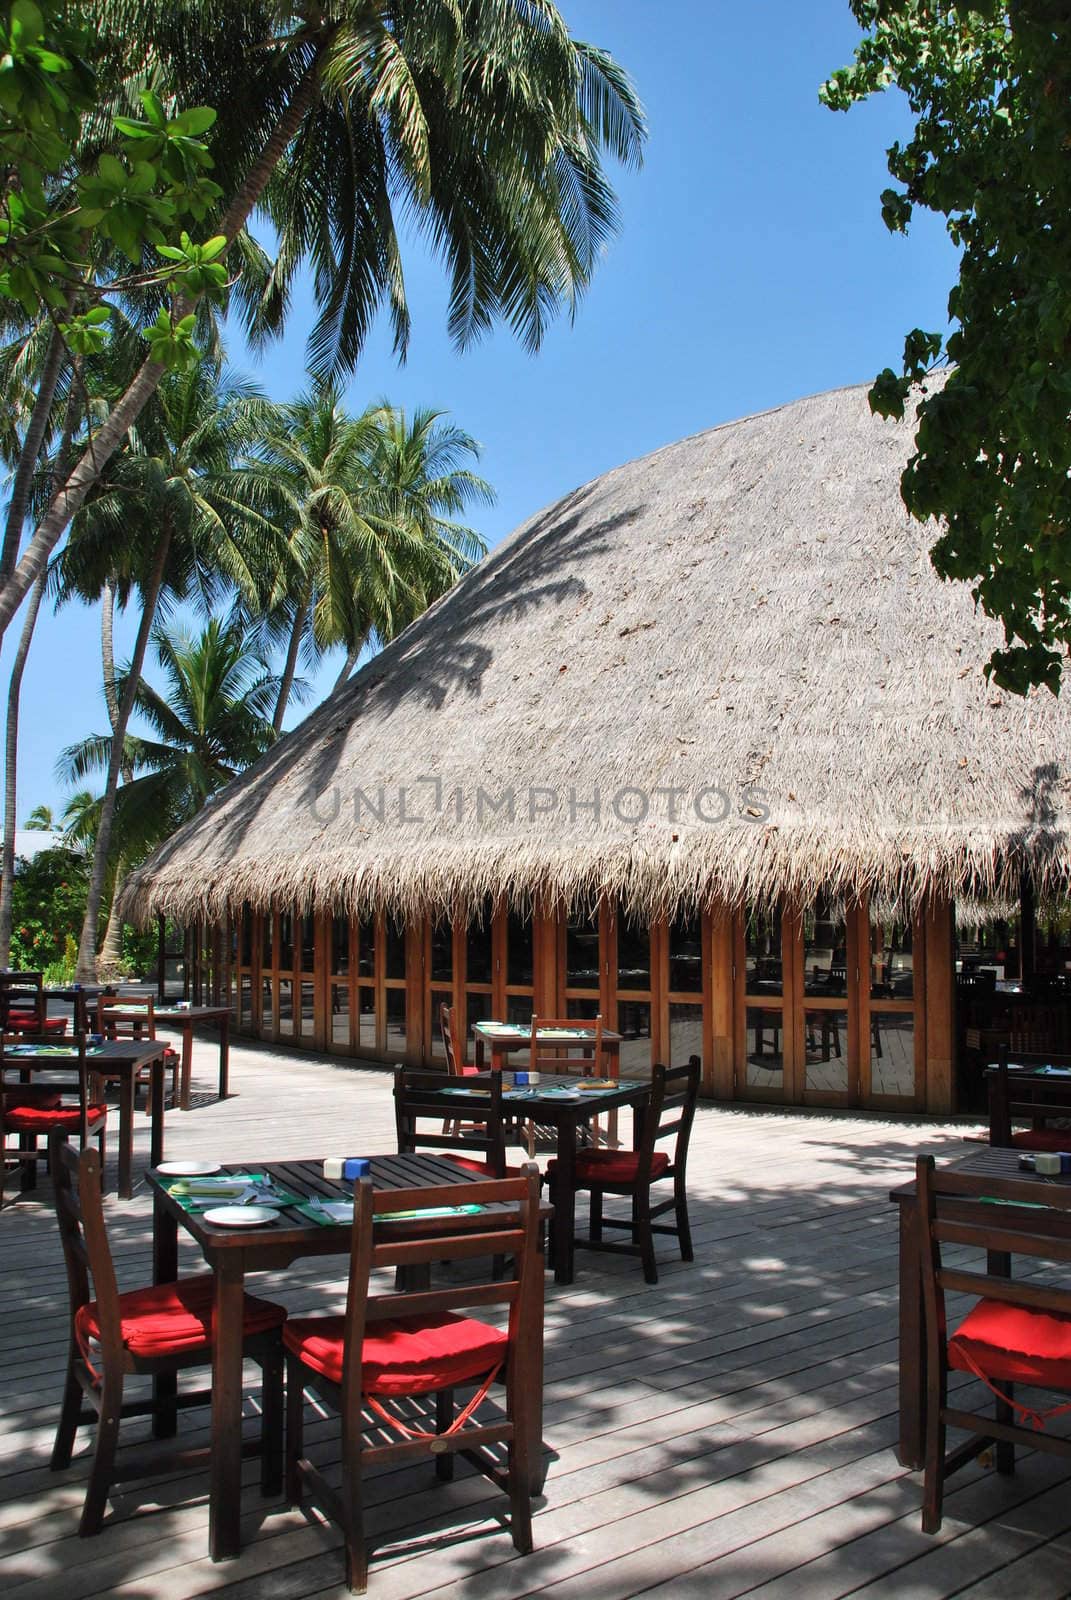 beautiful photo of a tropical view at a restaurant in a maldivian island